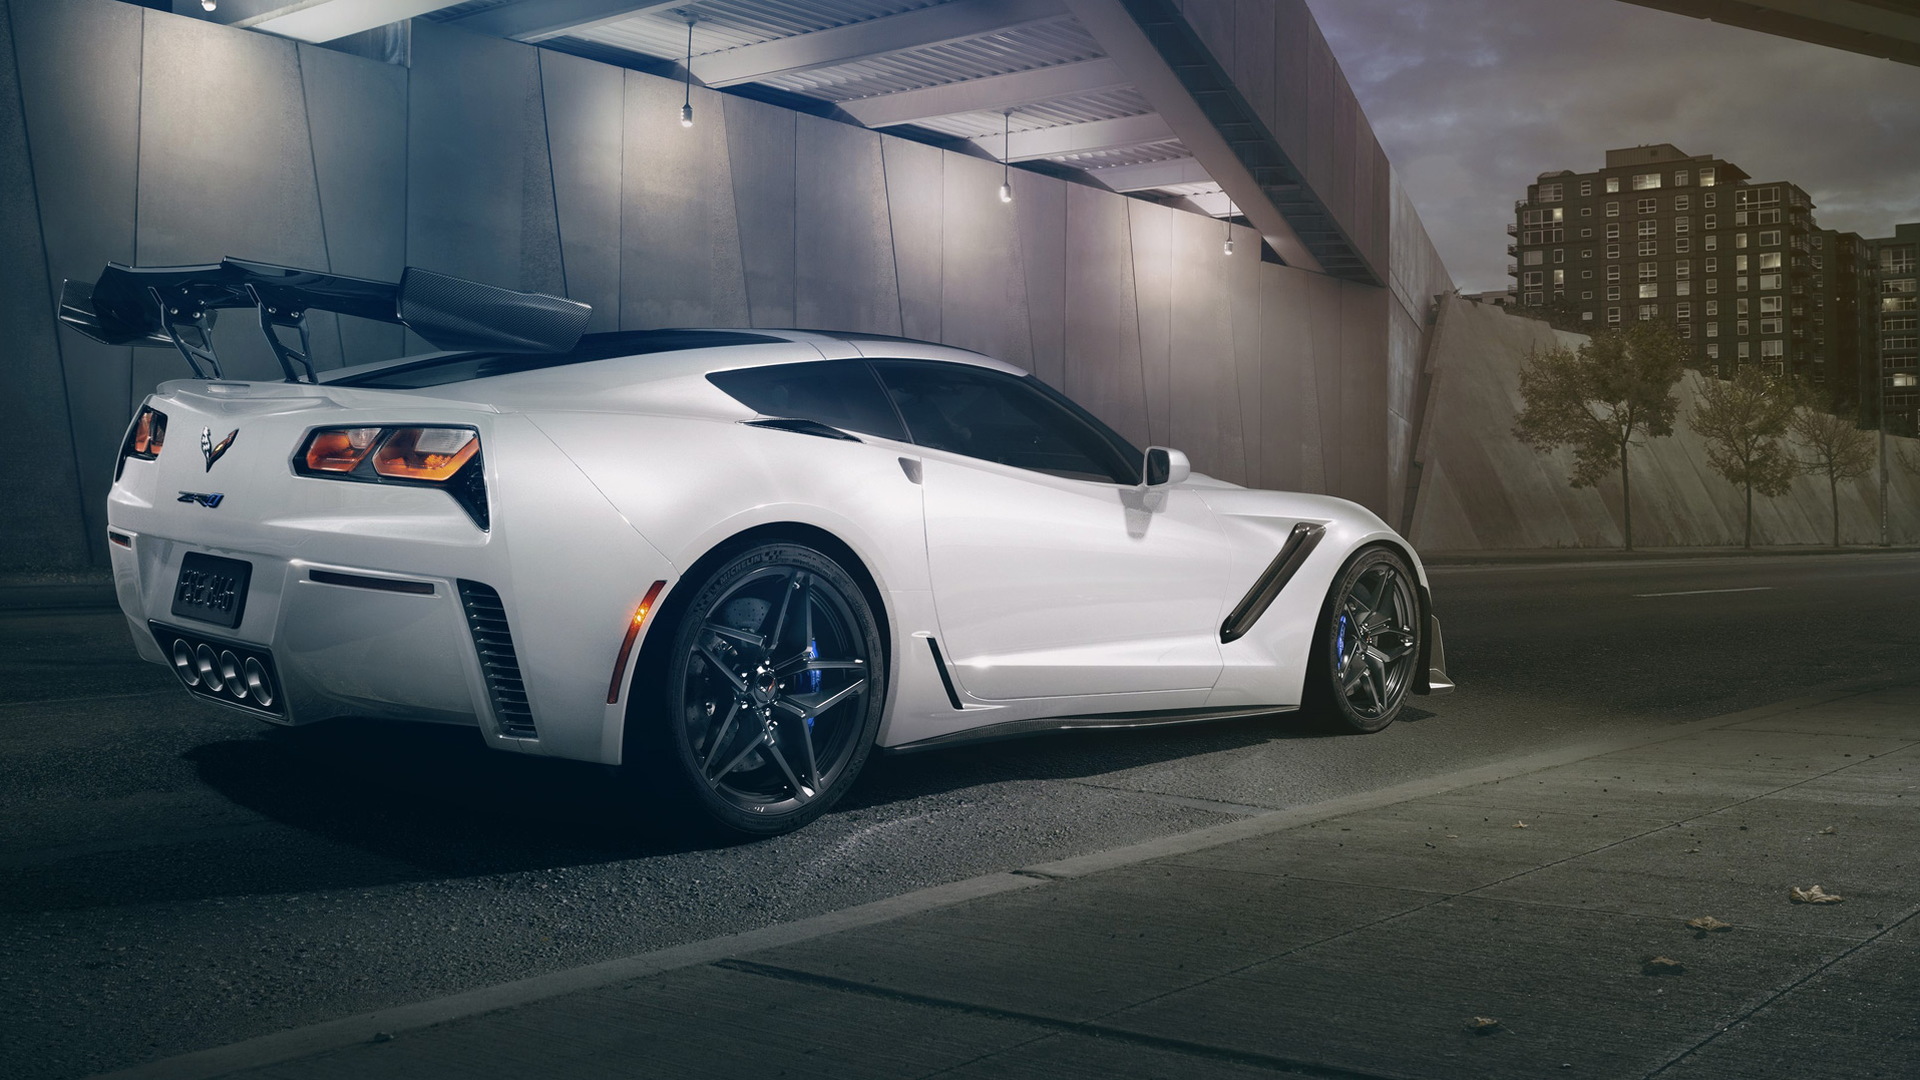 2019 Chevrolet Corvette ZR1 by Hennessey Performance Engineering